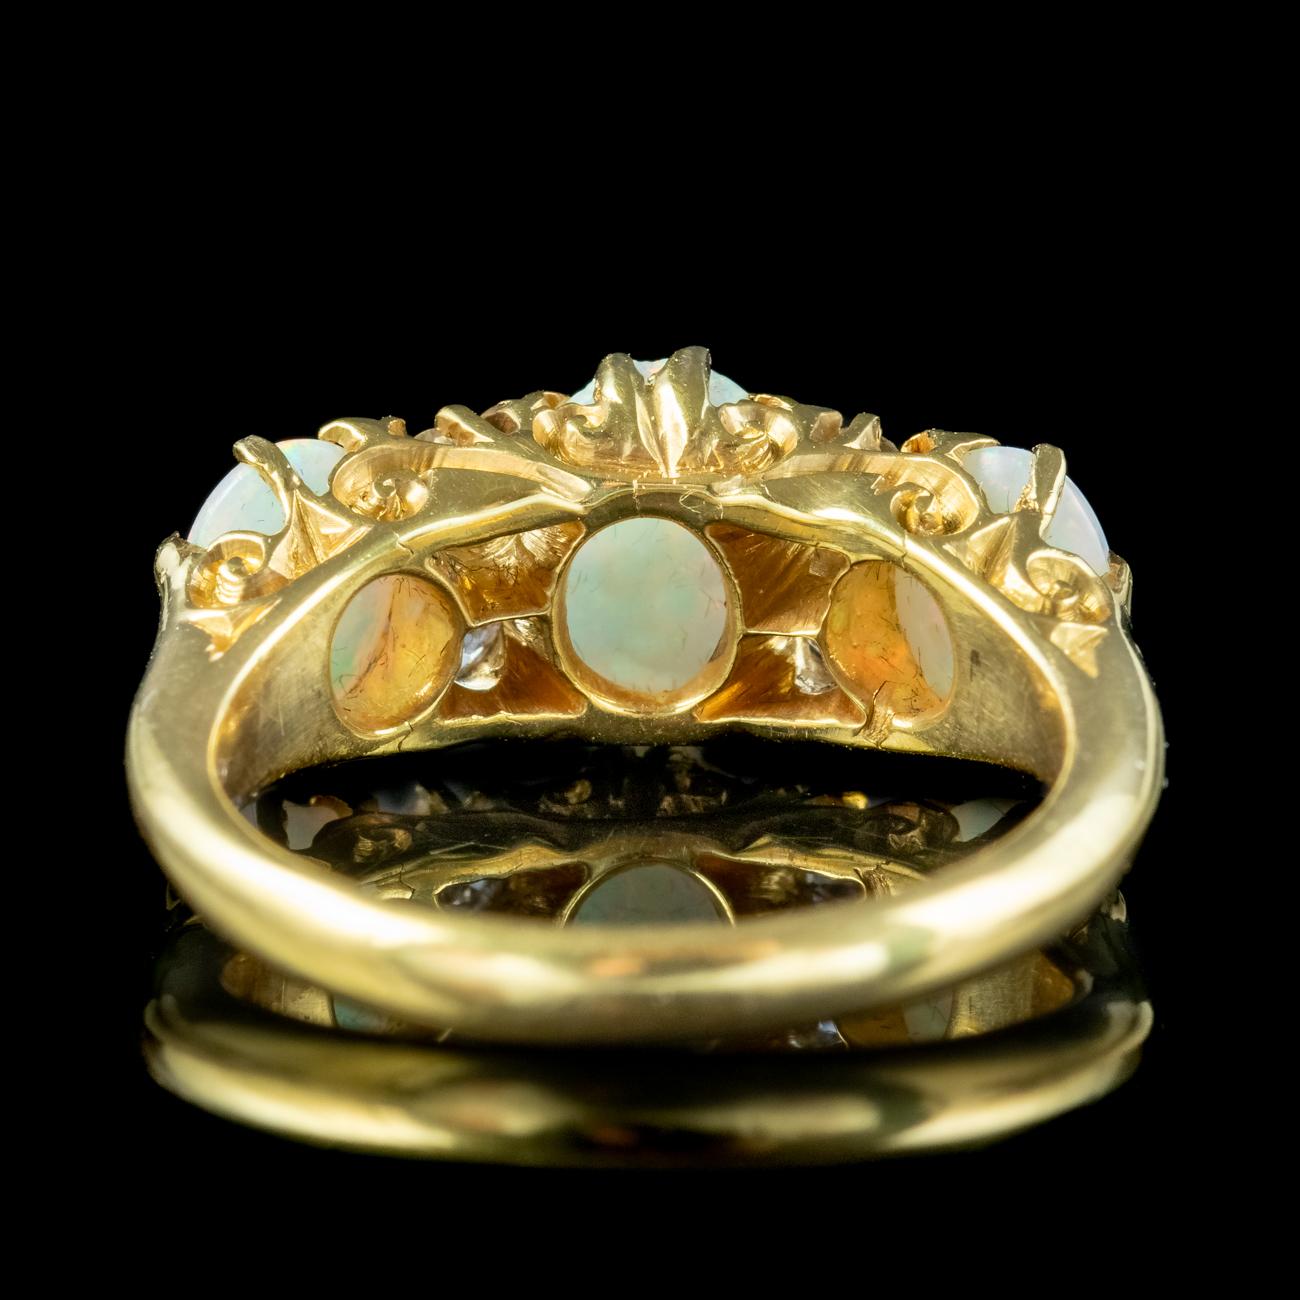 Cabochon Antique Edwardian Opal Diamond Ring 2.4 Carat Opal Dated 1906 For Sale